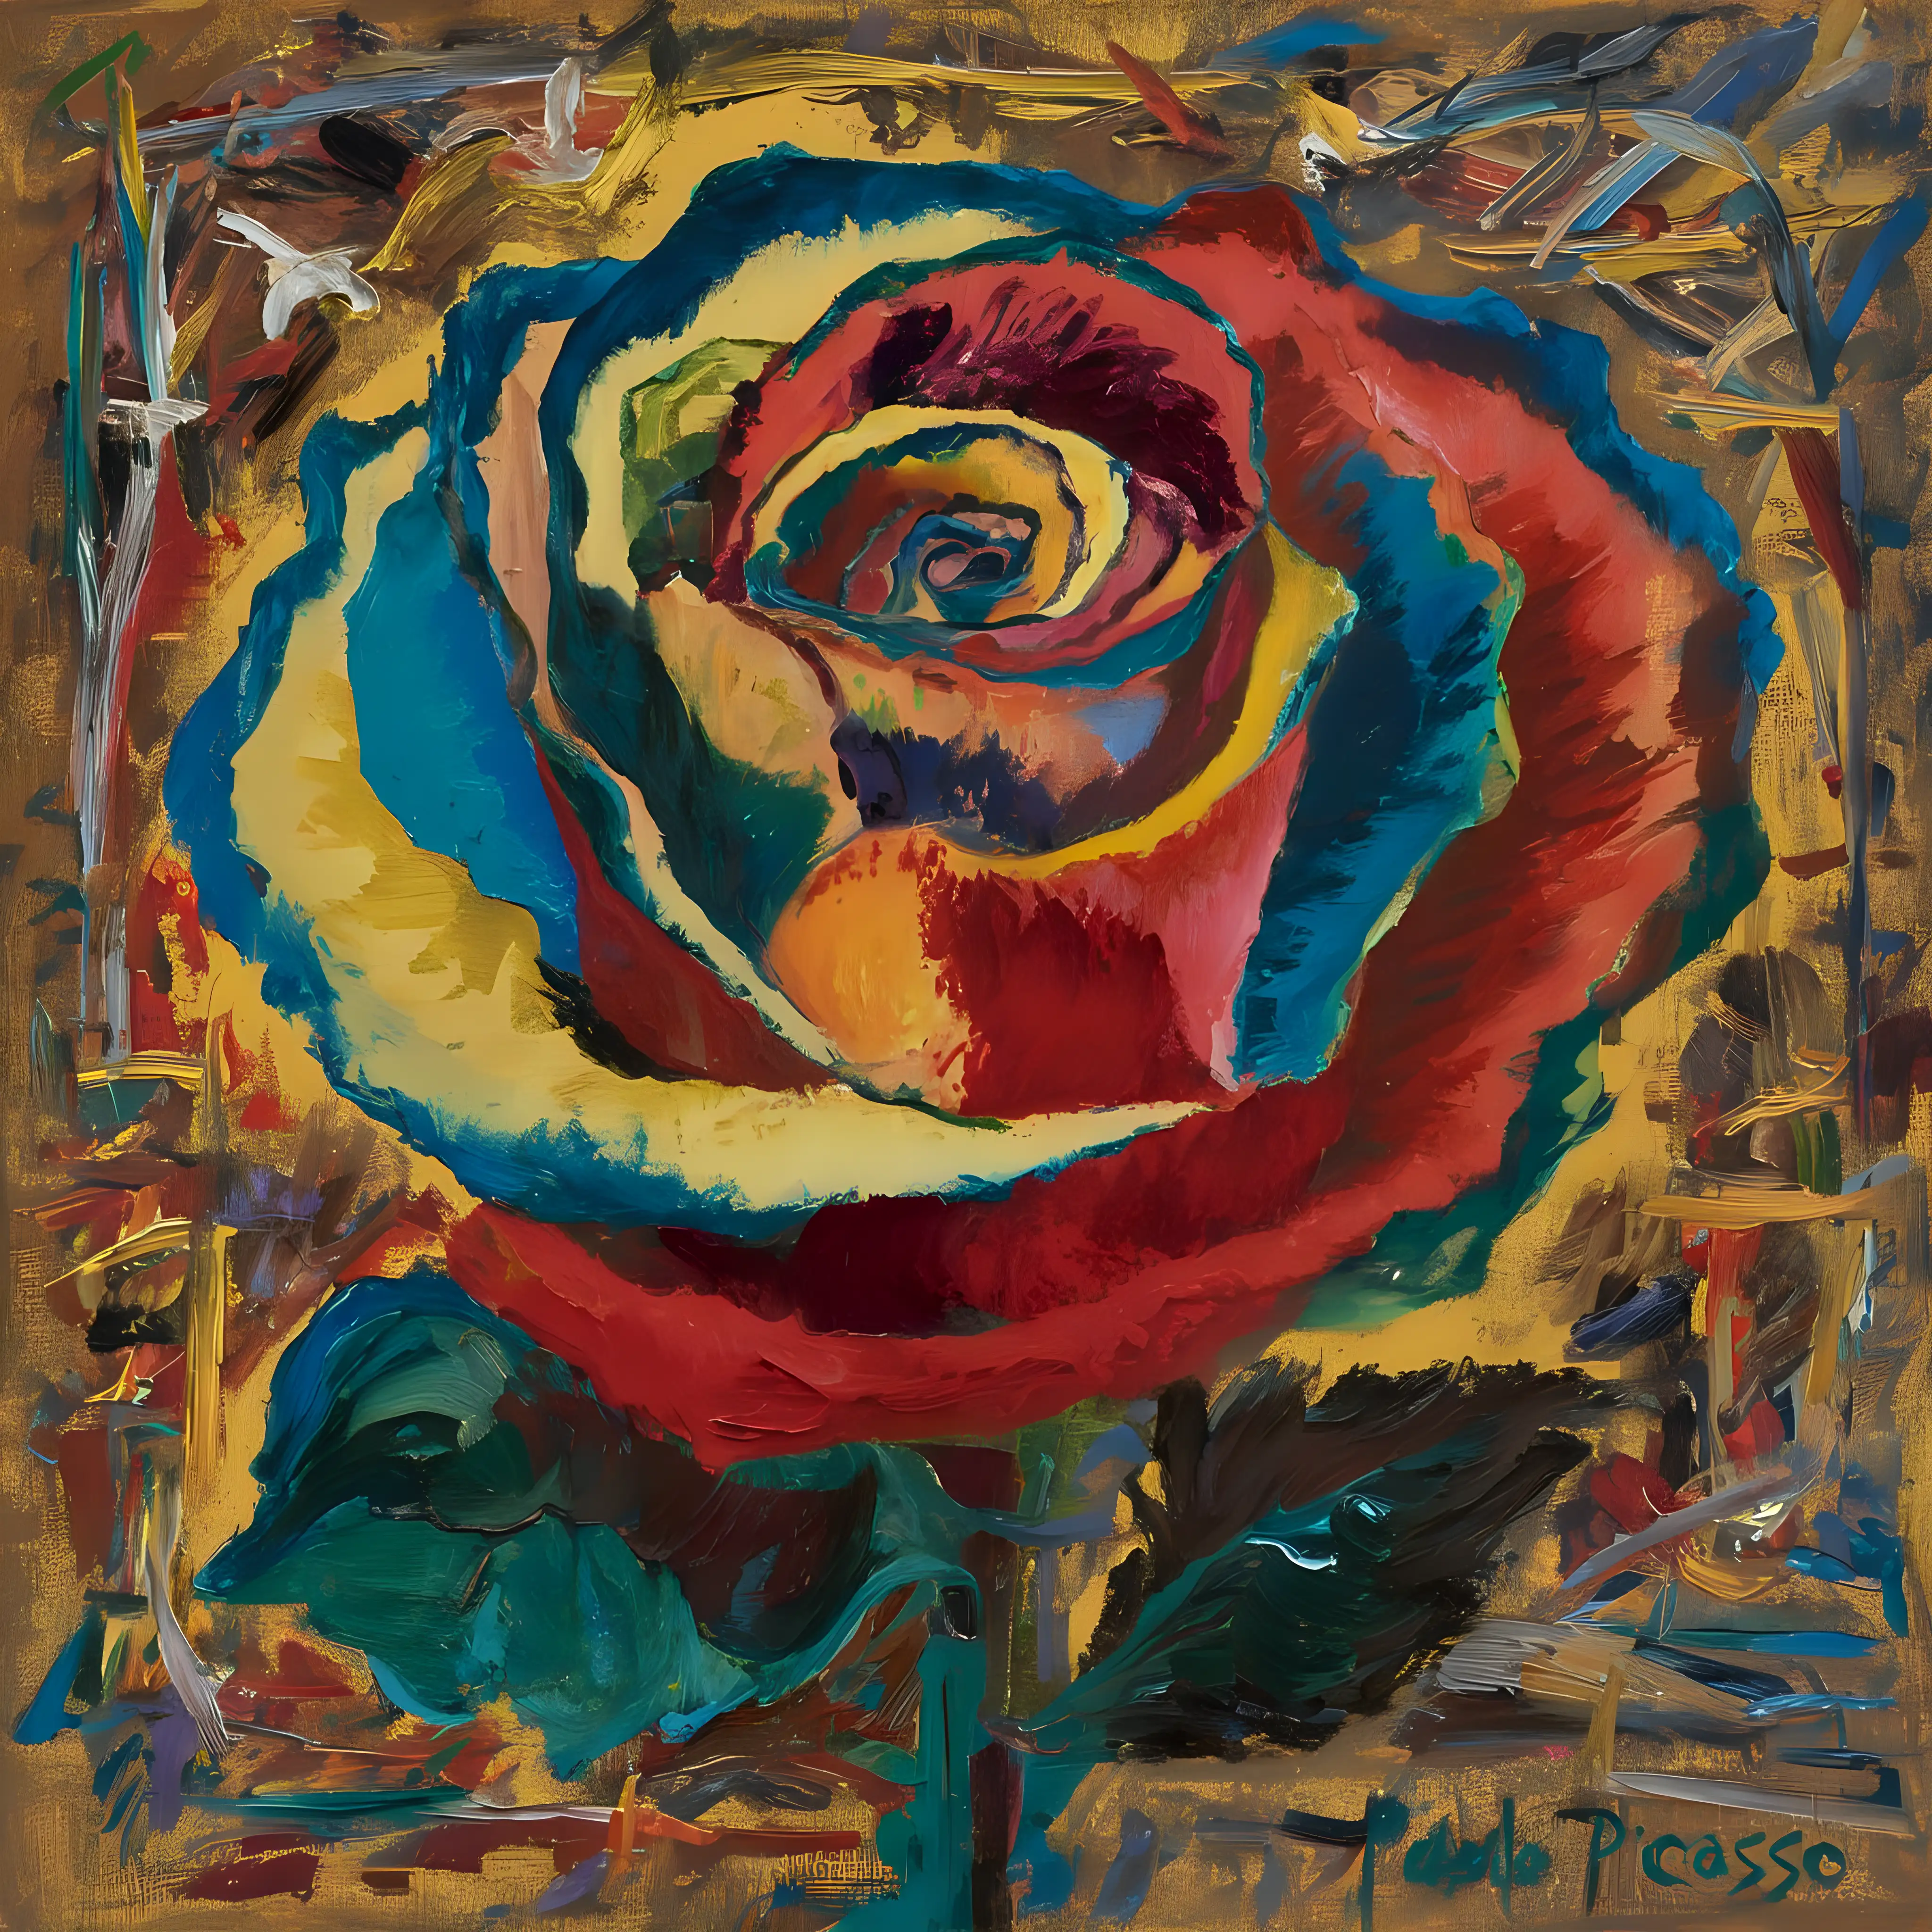 Oil painting of a distorted rose by Pablo Picasso